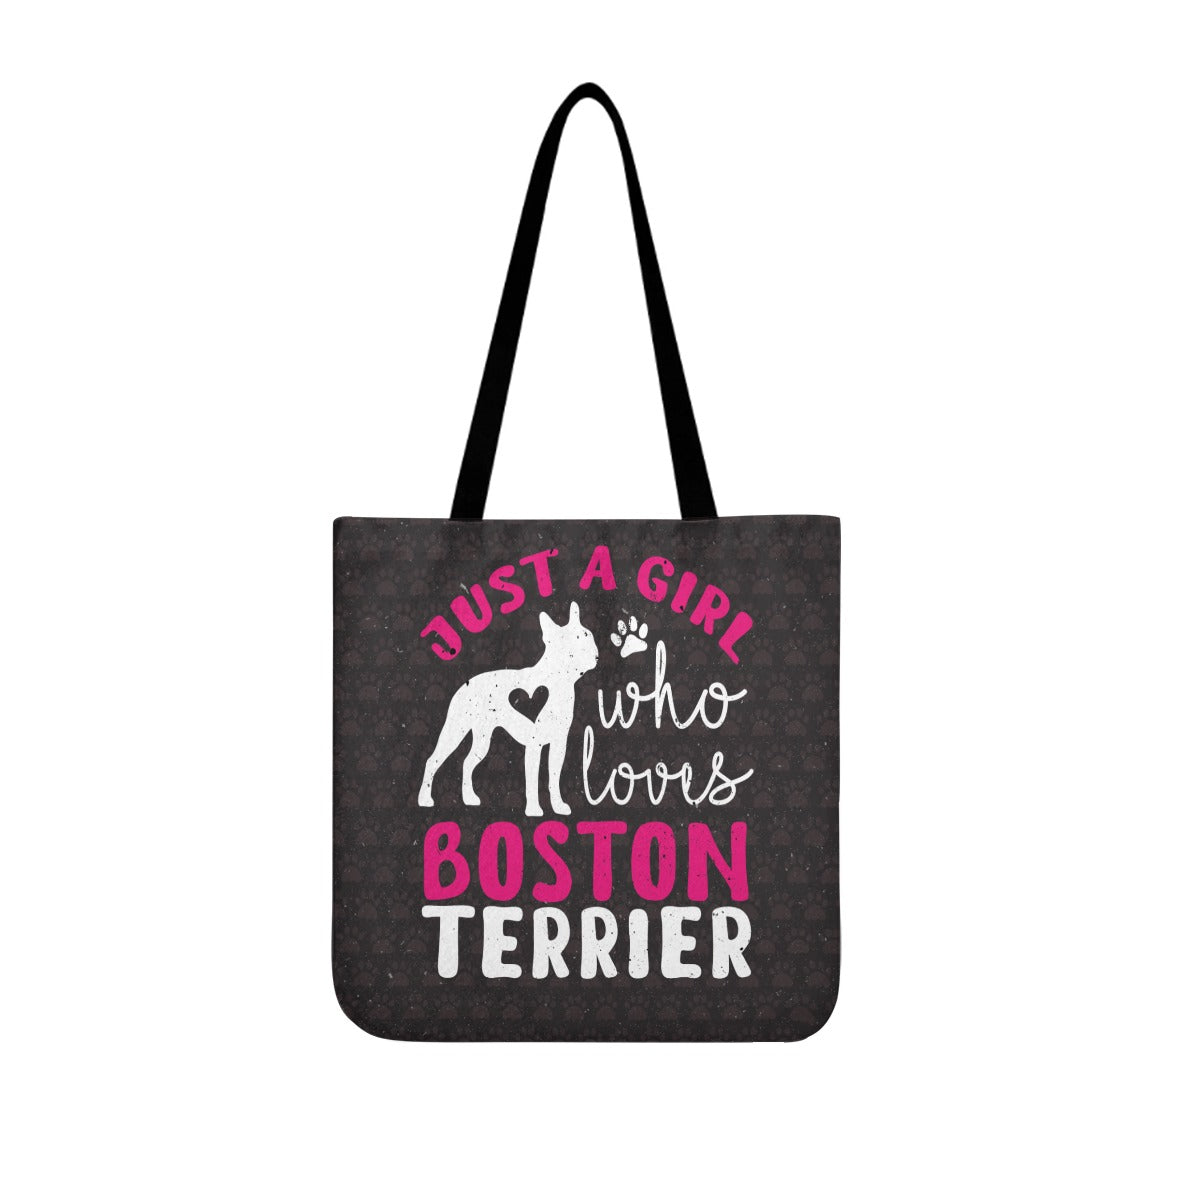 Skippy- Cloth Tote Bags for Boston Terrier lovers